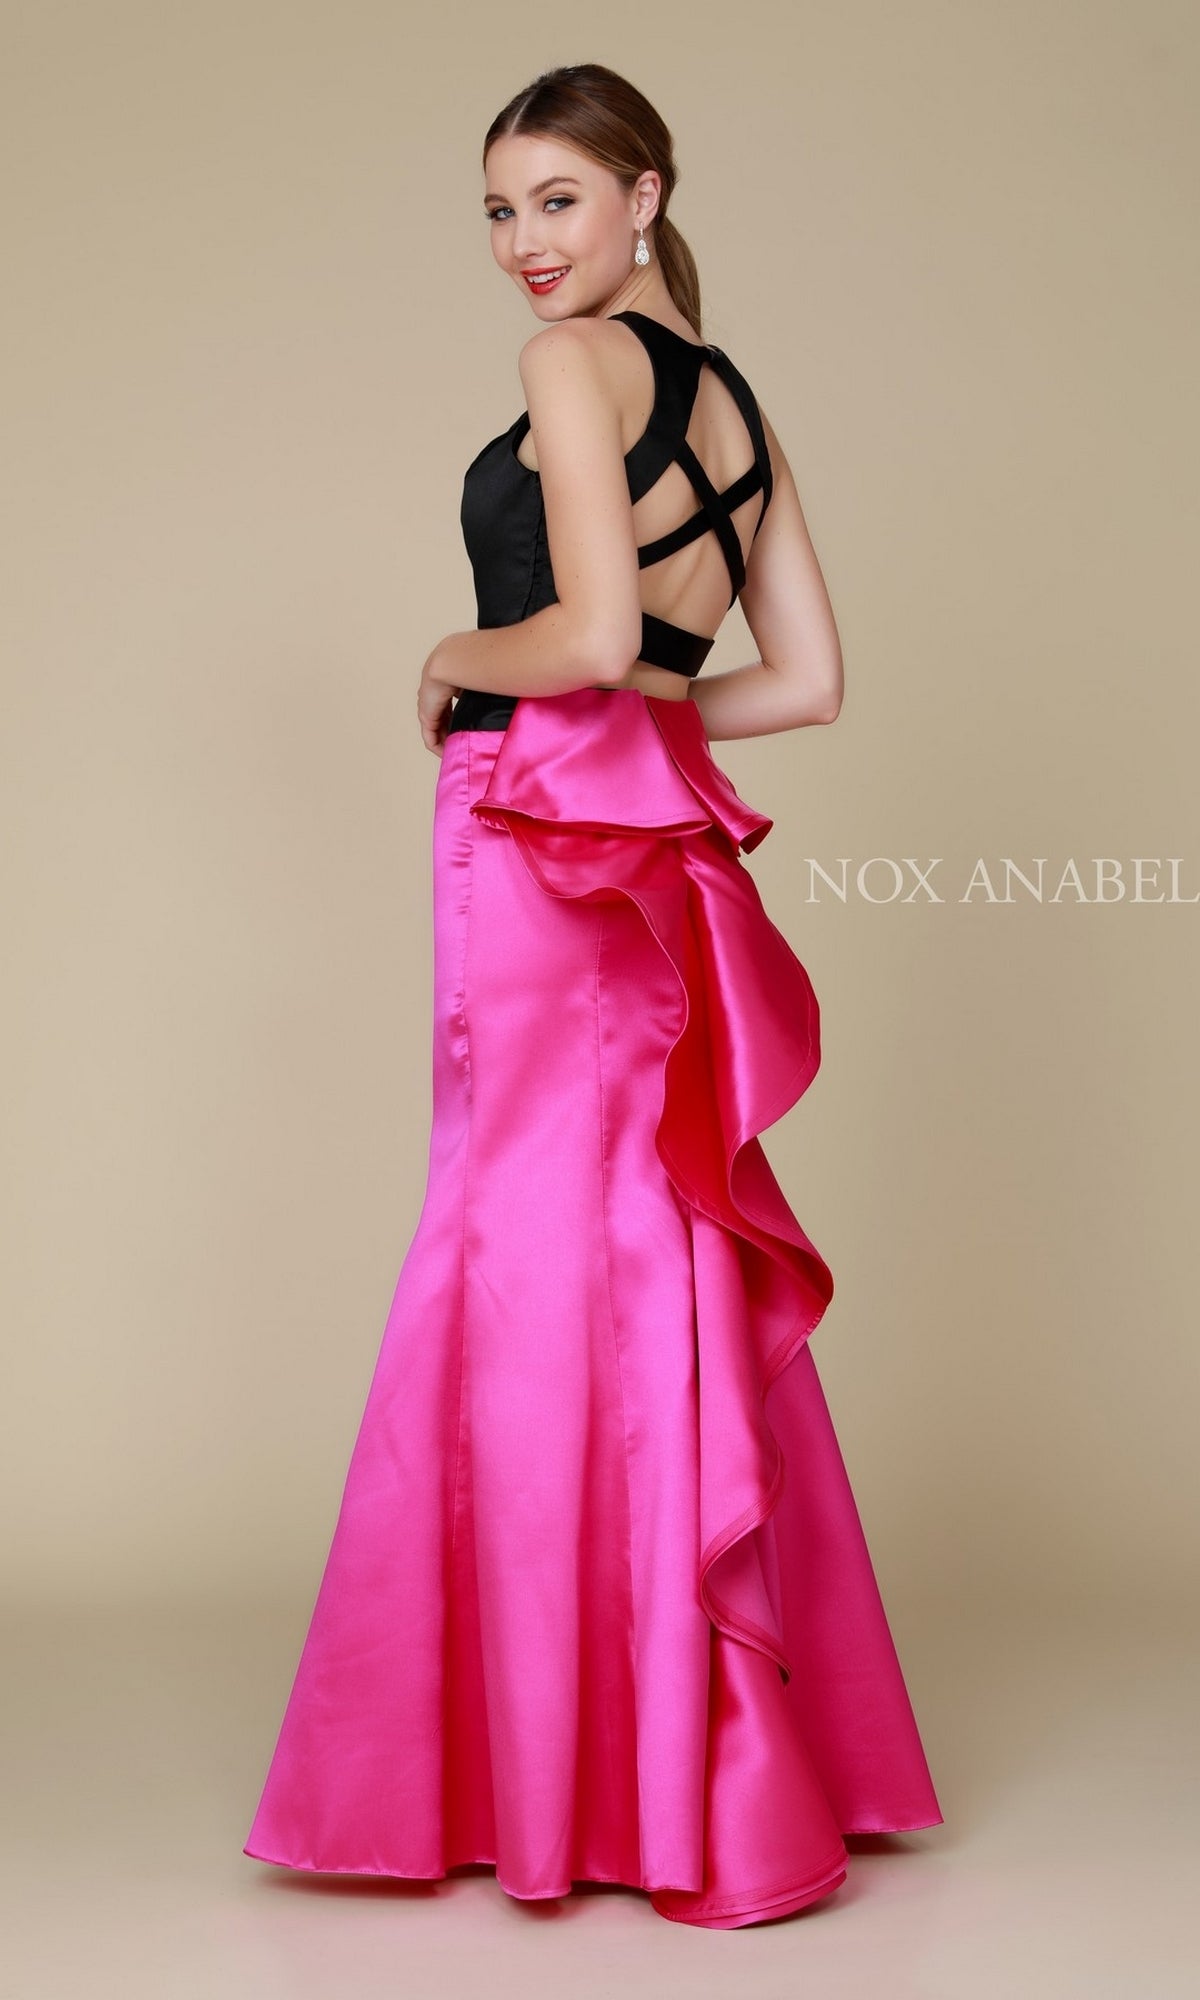  Open Back Two Piece Prom Dress